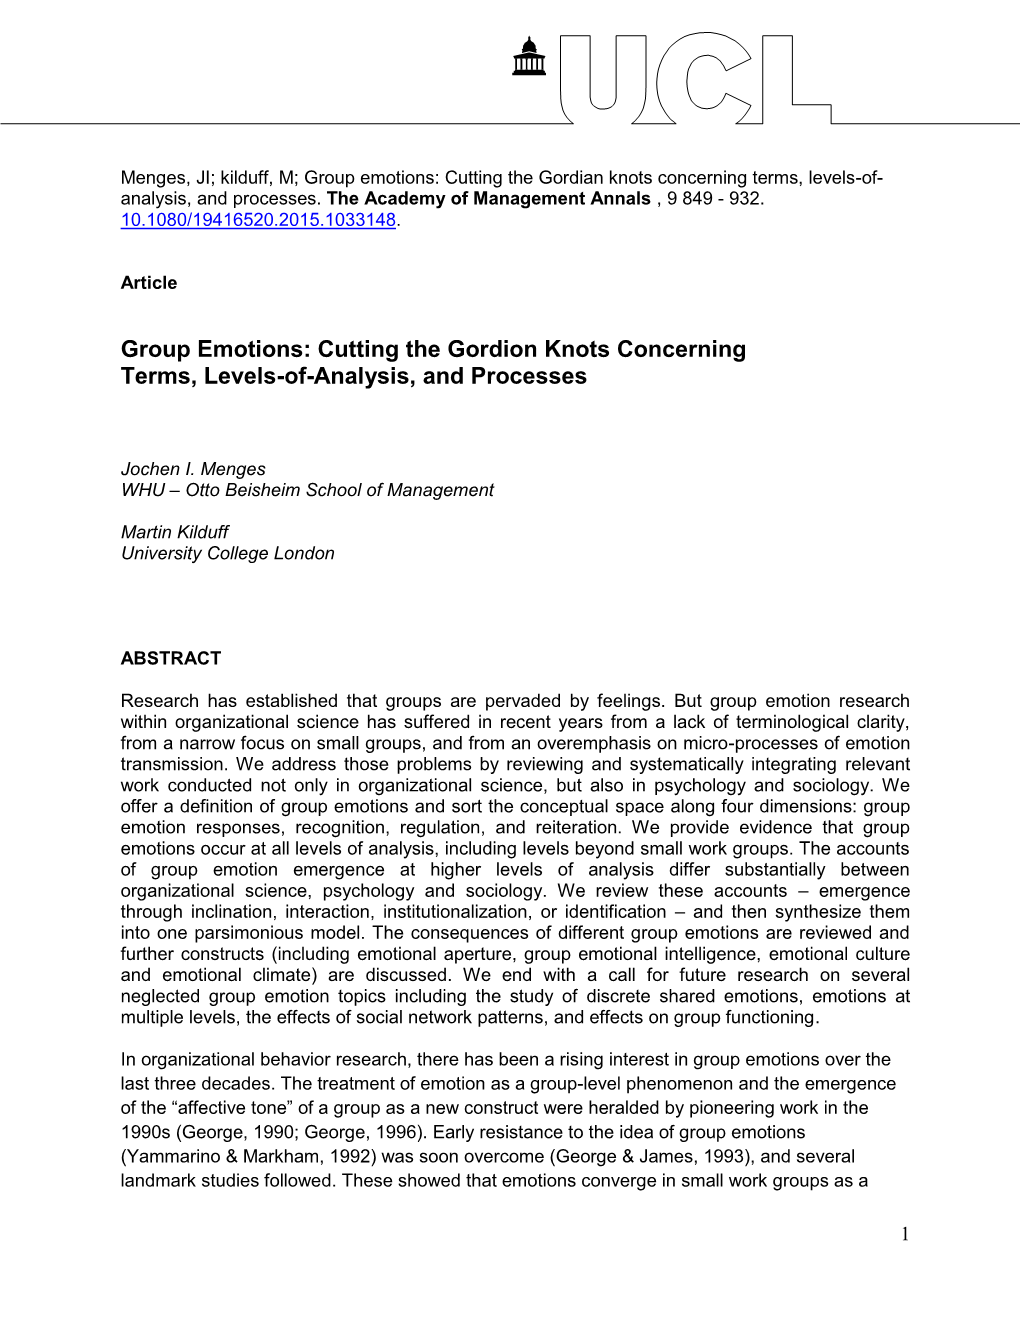 Group Emotions: Cutting the Gordian Knots Concerning Terms, Levels-Of- Analysis, and Processes